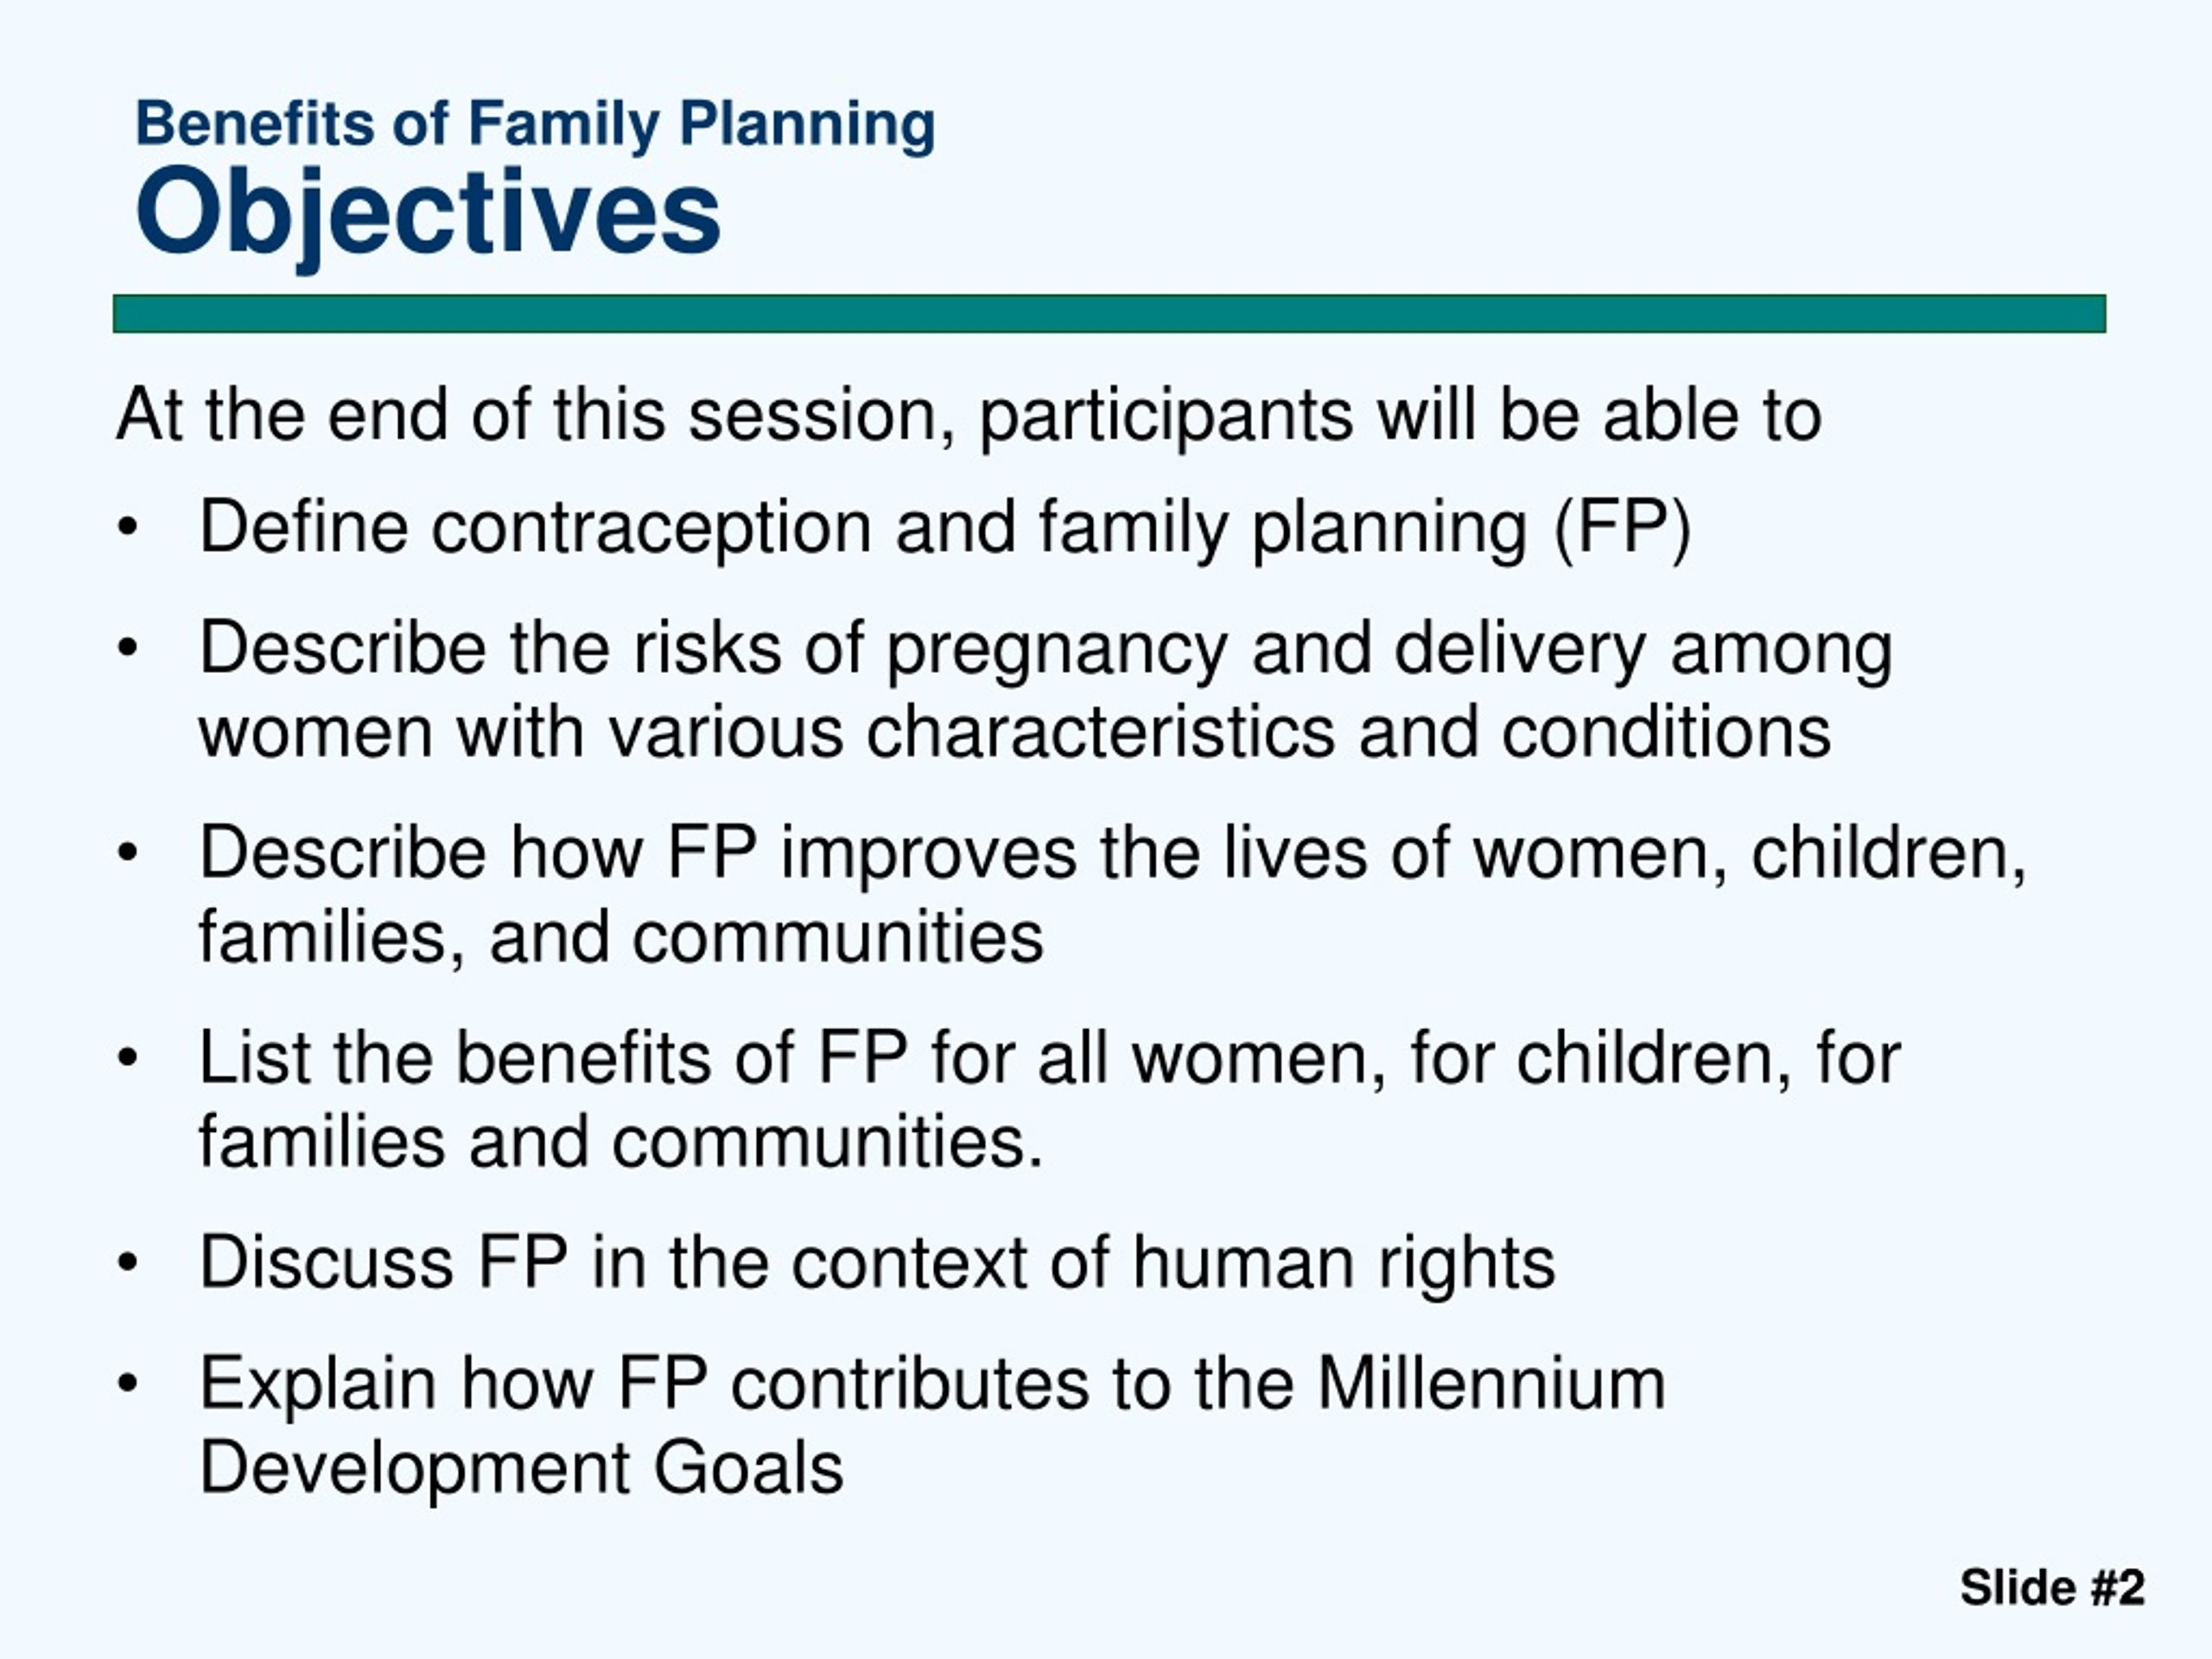 research analysis and utilization of findings in family planning